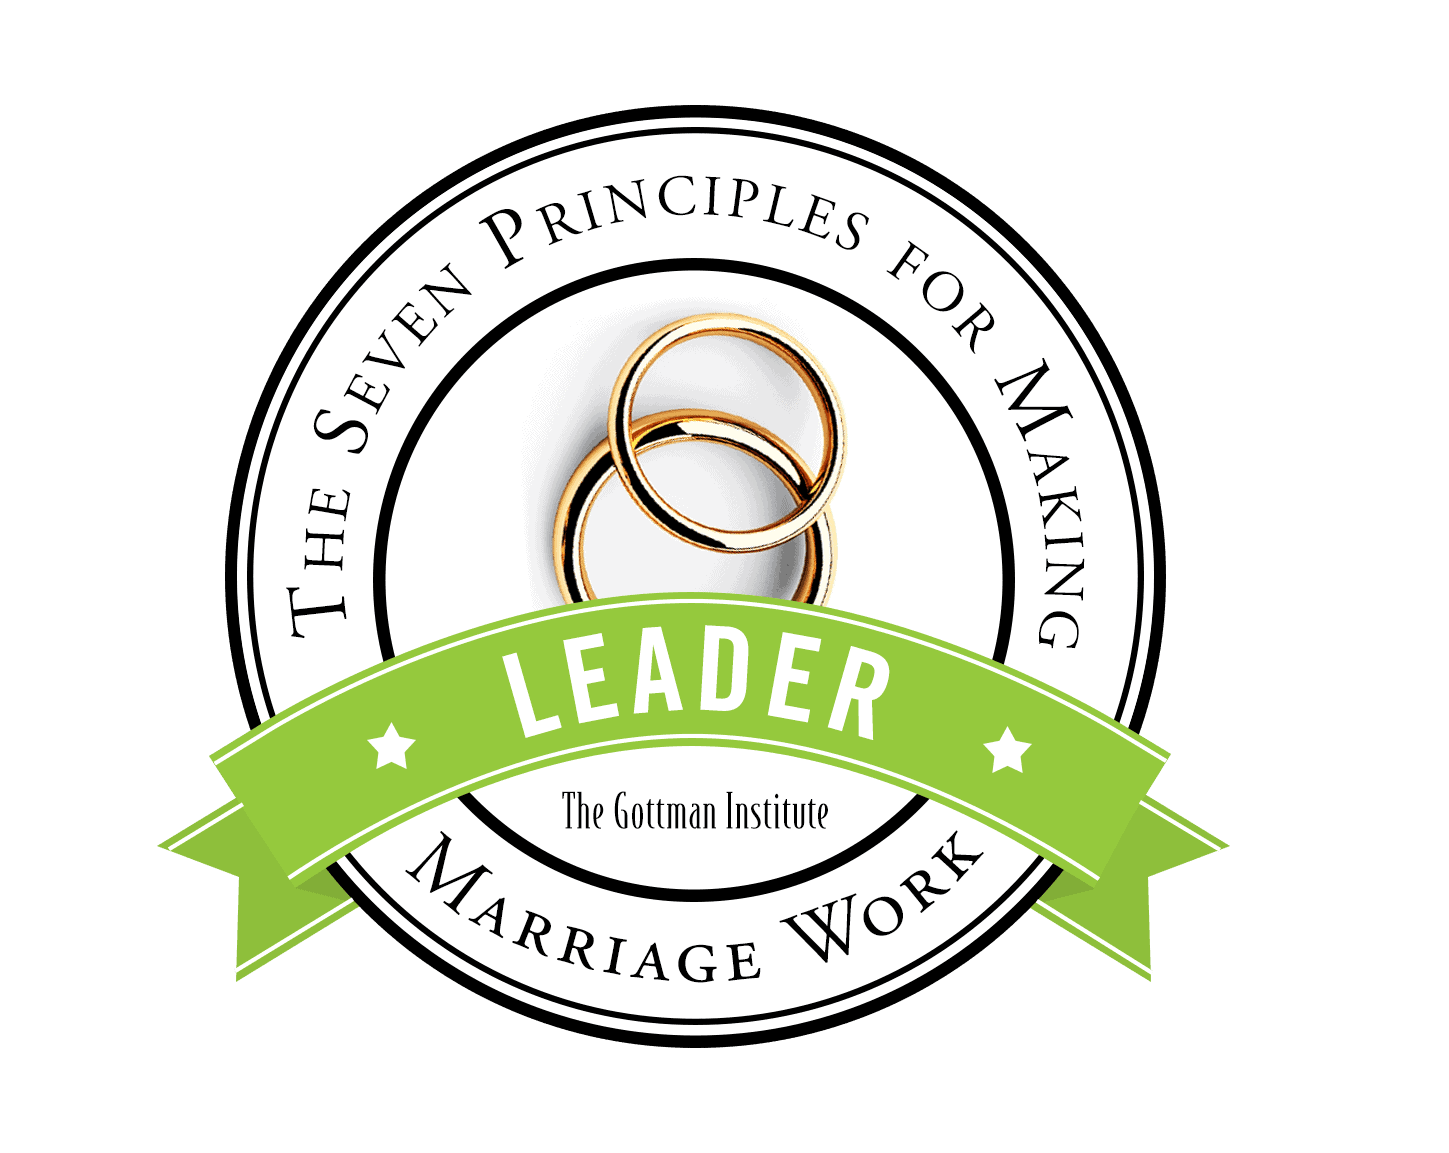 Seven Principles for making marriage work